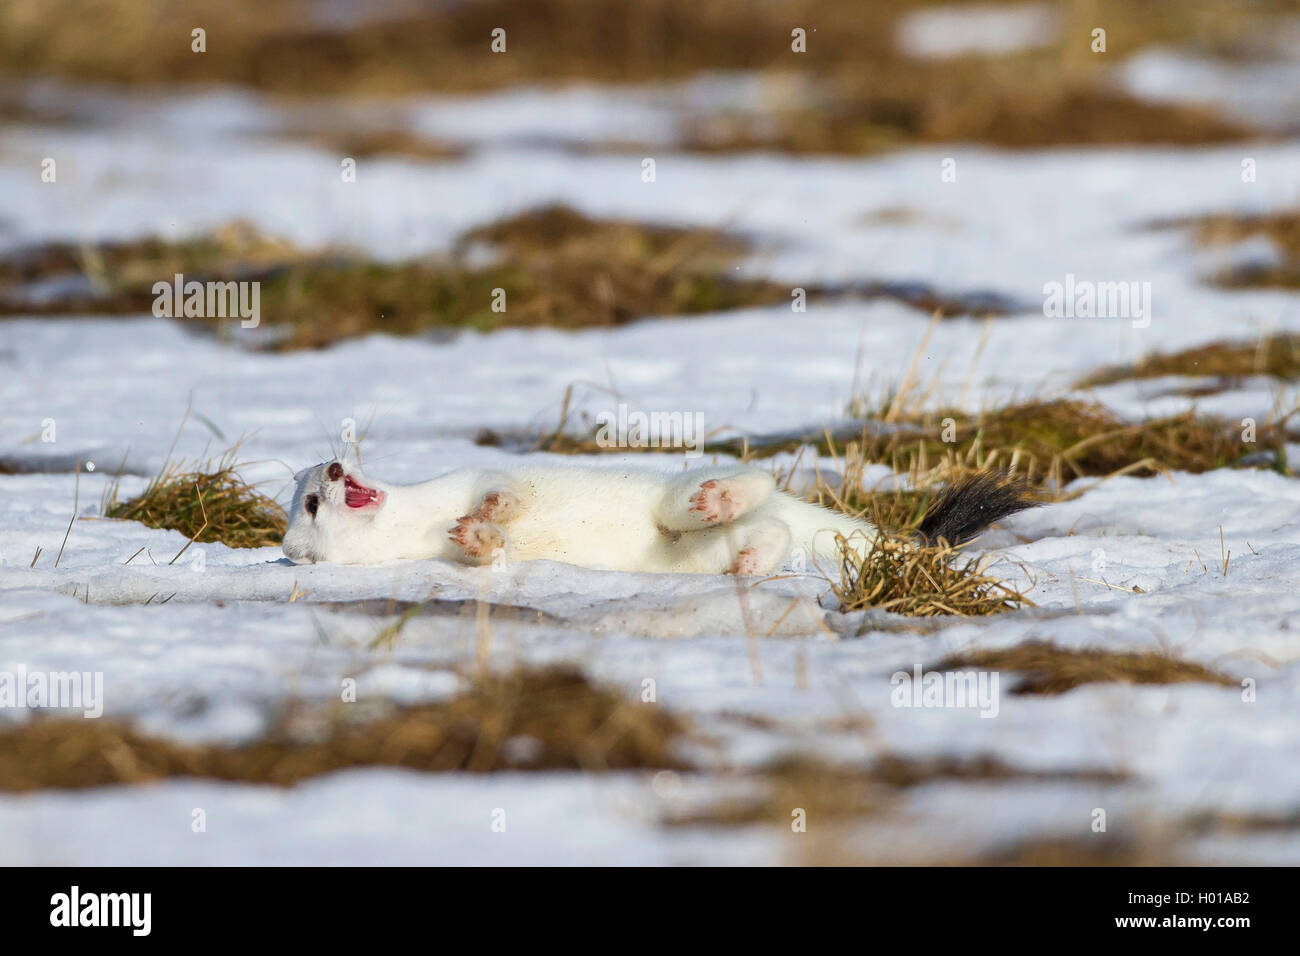 Ermine, Stoat, Short-tailed weasel (Mustela erminea), rolling frolicsomely in the snow, Germany Stock Photo